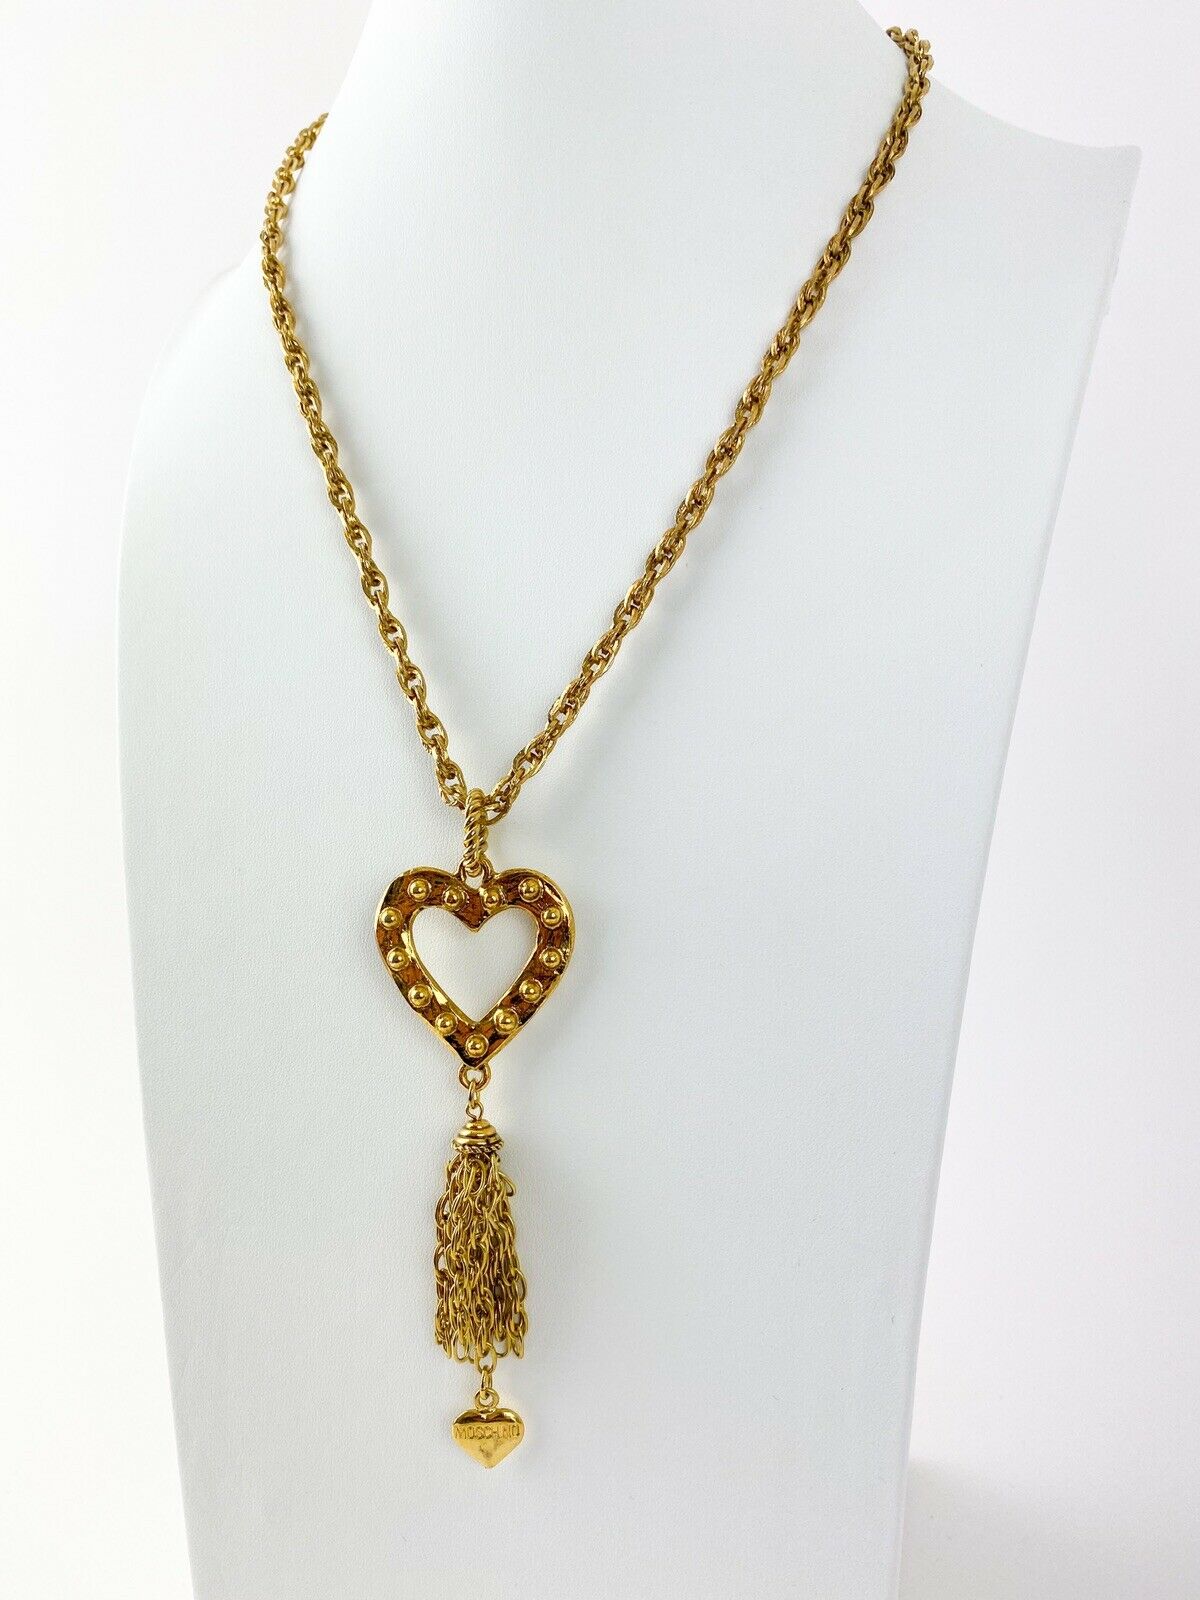 Moschino Vintage Gold Tone Openwork Heart Long Necklace Chain Fringe